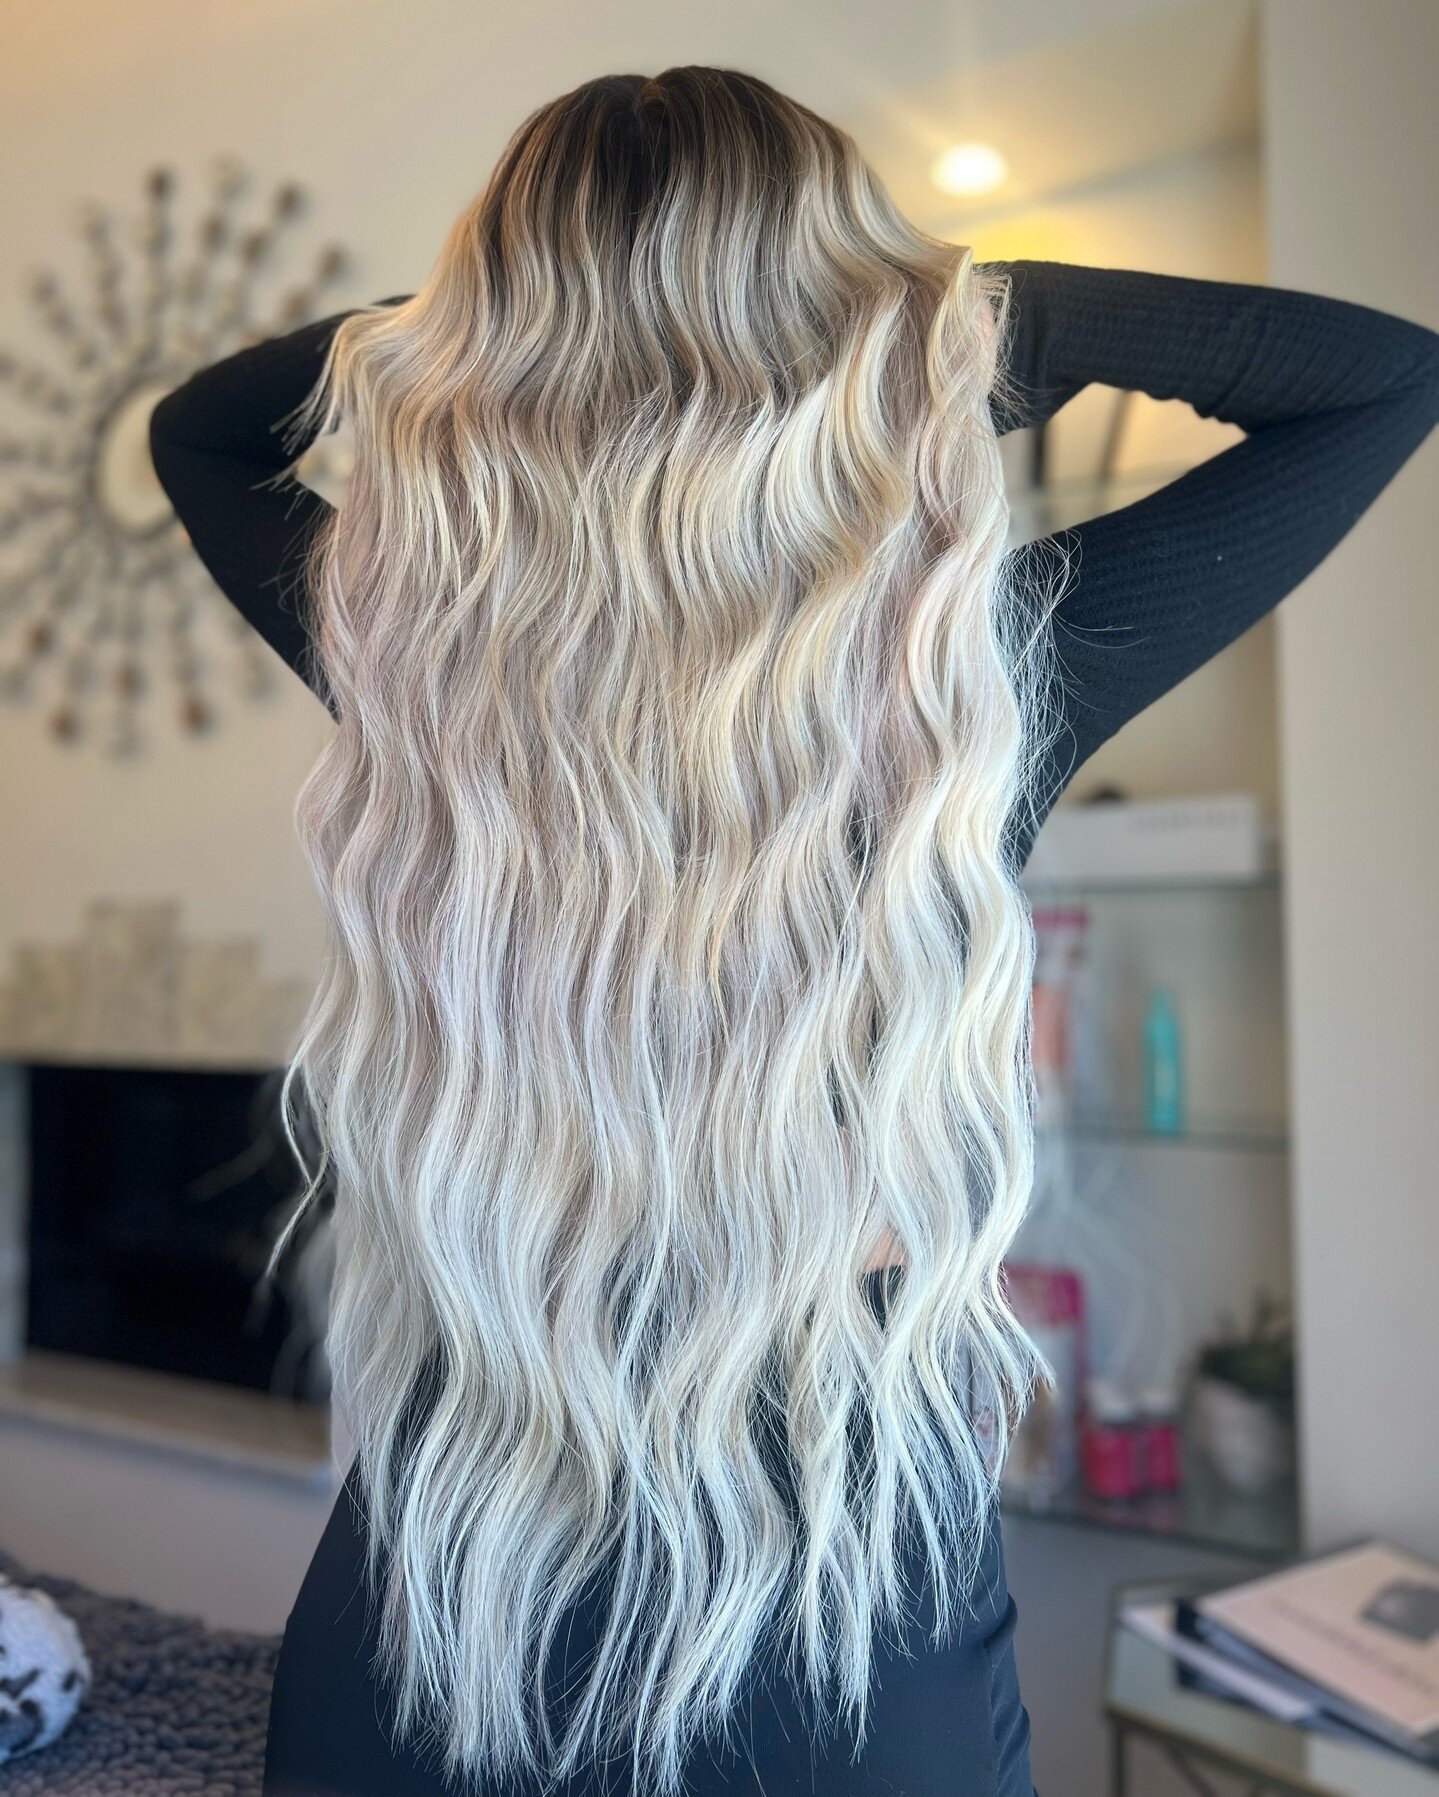 It's all about the perfect blend! *Chef's kiss* Jennifer worked her magic with heavy baby lights, a seamless shadow root, and the ultimate wow factor: two rows of 24&quot; extensions. We're fully in love 💖✨

#perfectblend #babylights #shadowroot #24